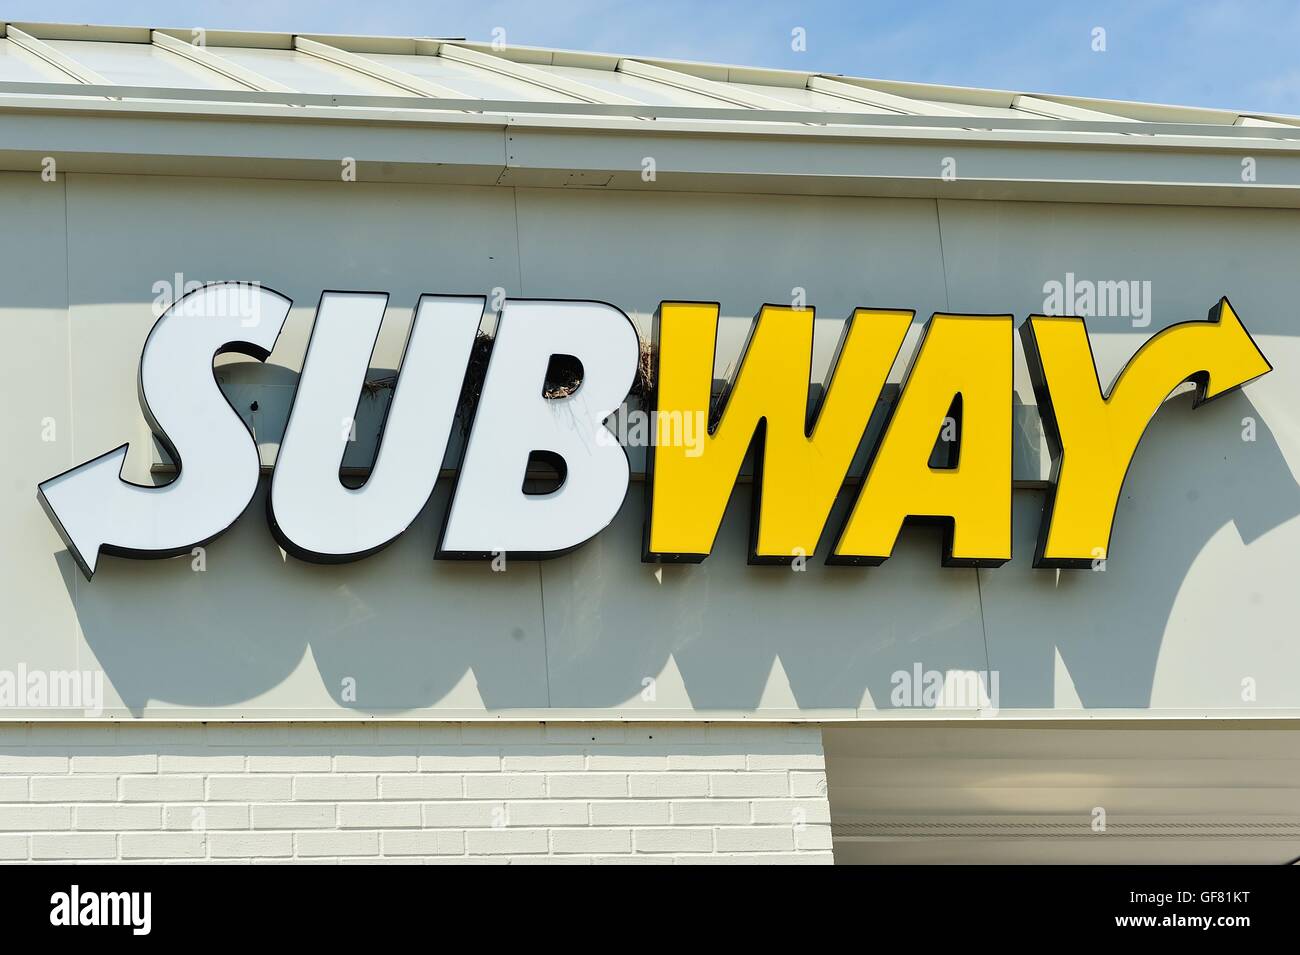 Recognizable national and regional brand locations abound in urban areas such as suburban Chicago like this Subway sign. Stock Photo